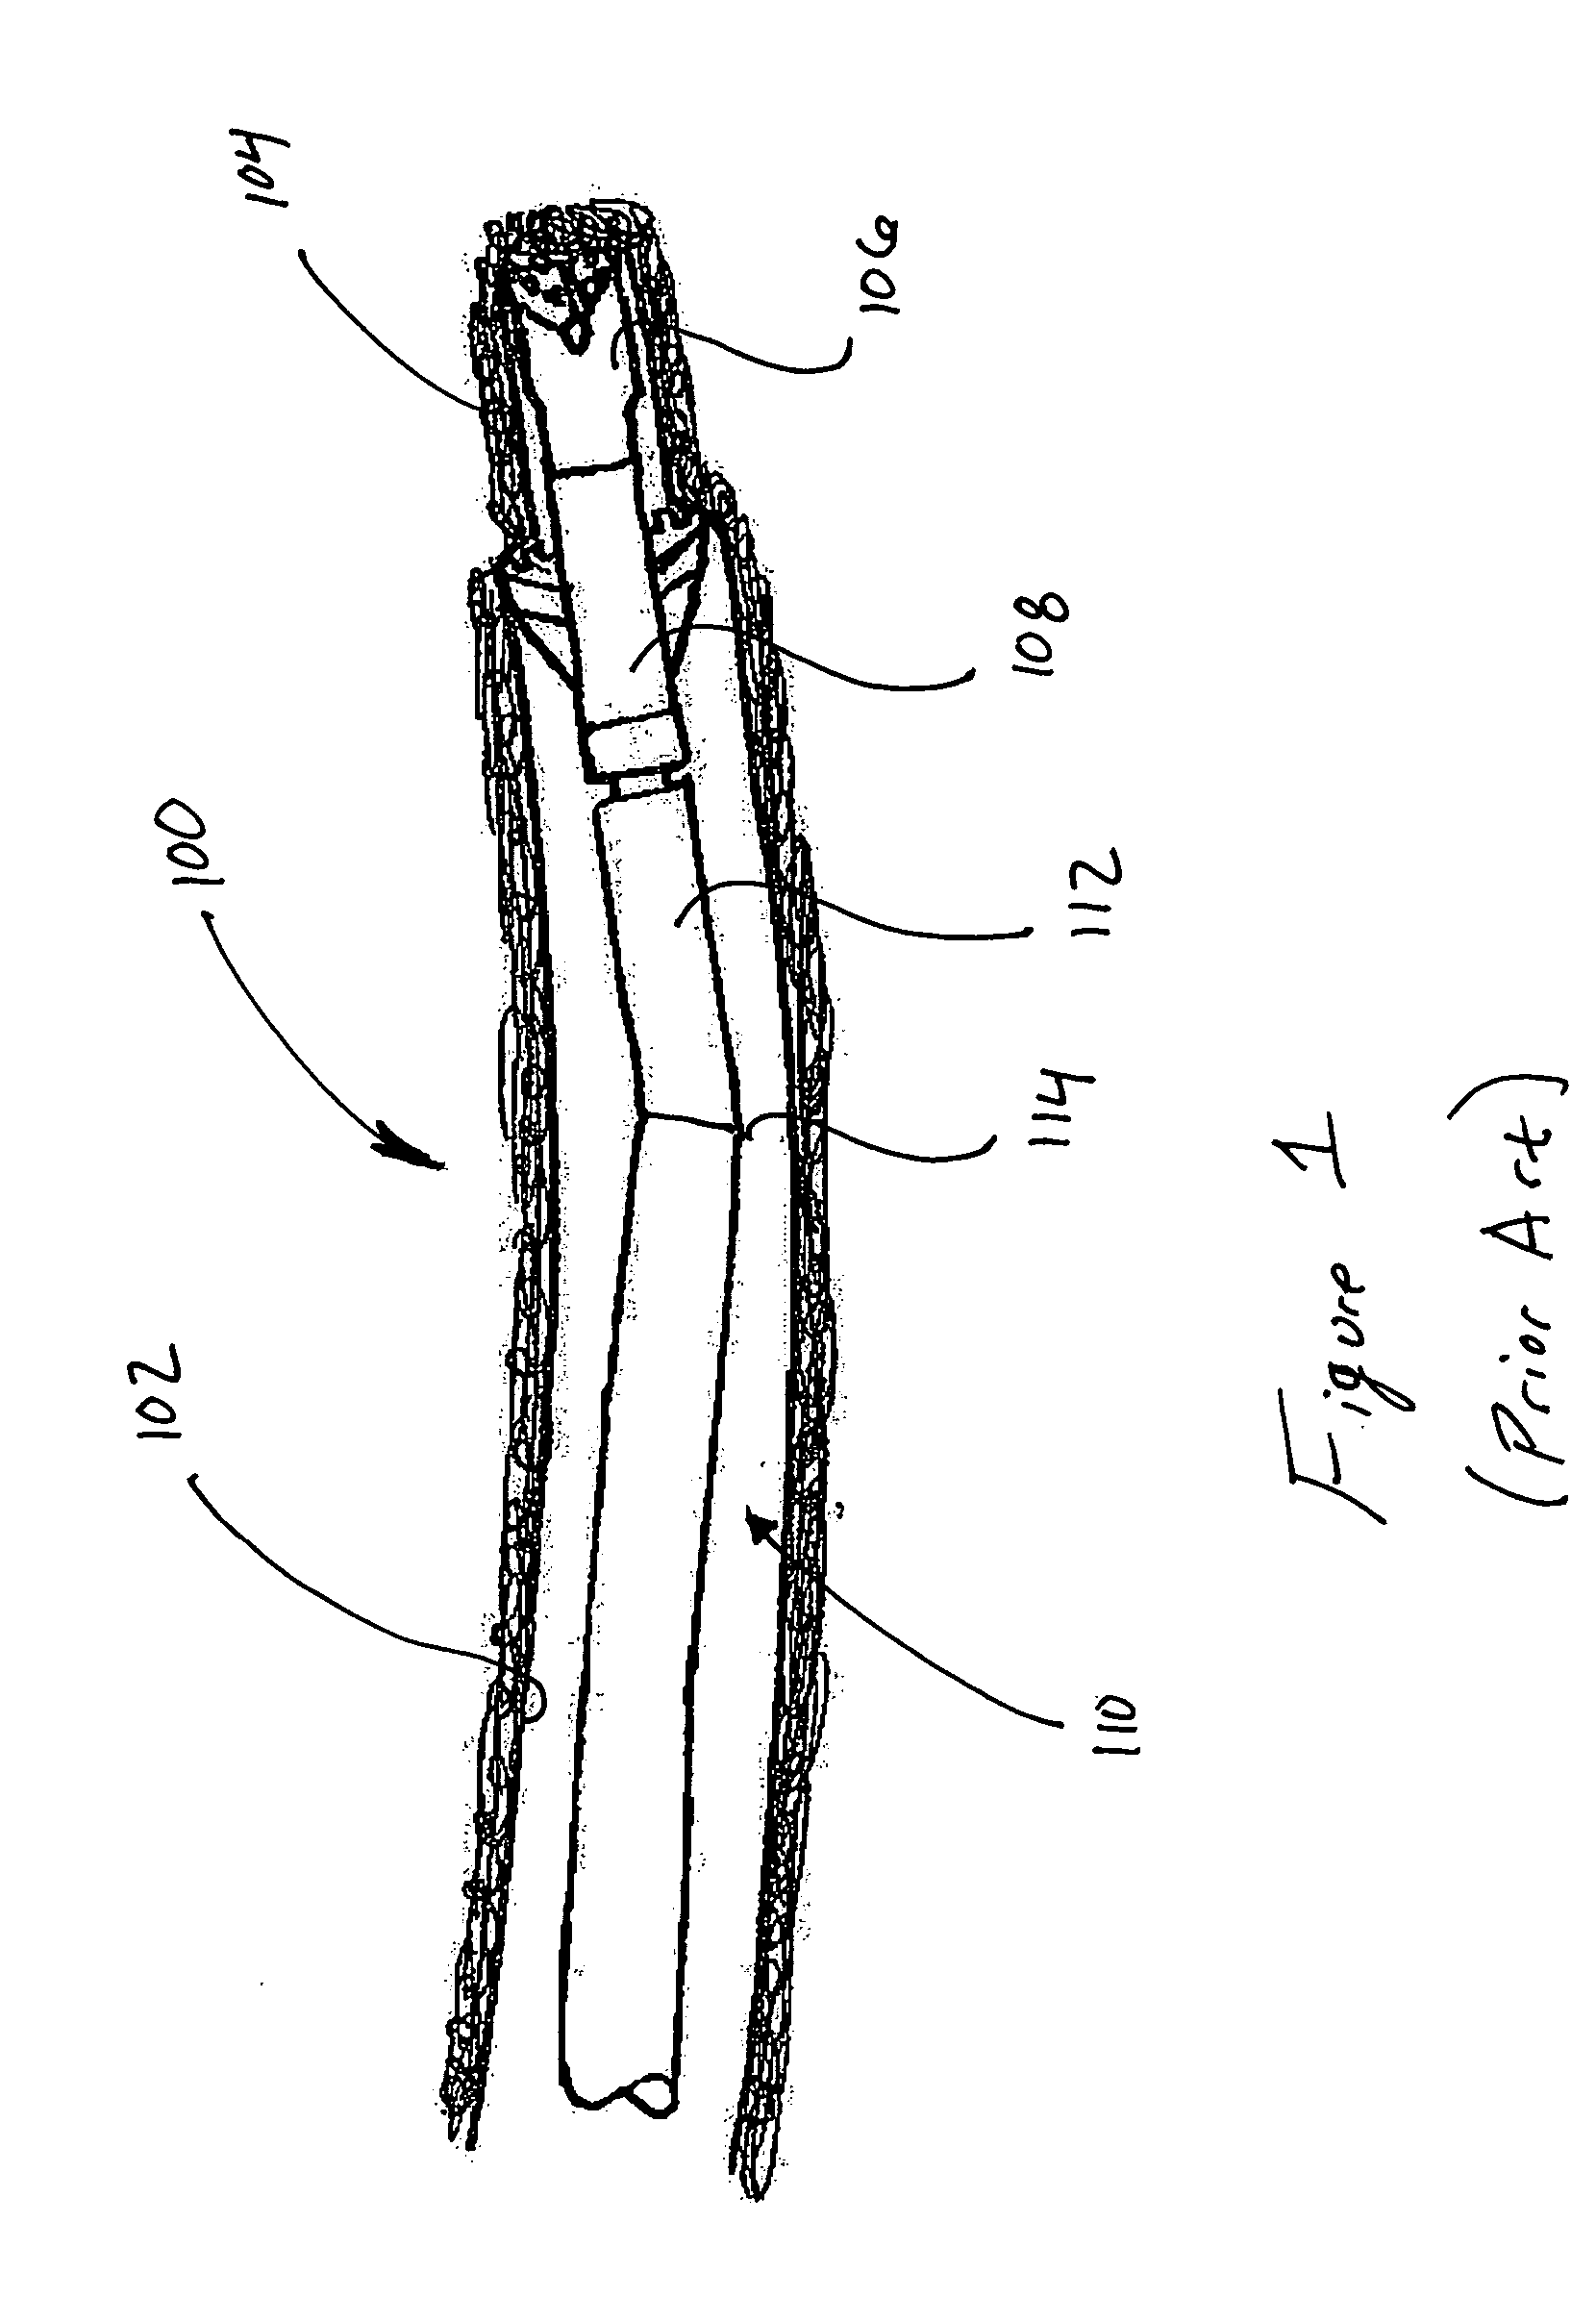 Steerable underreamer/stabilizer assembly and method